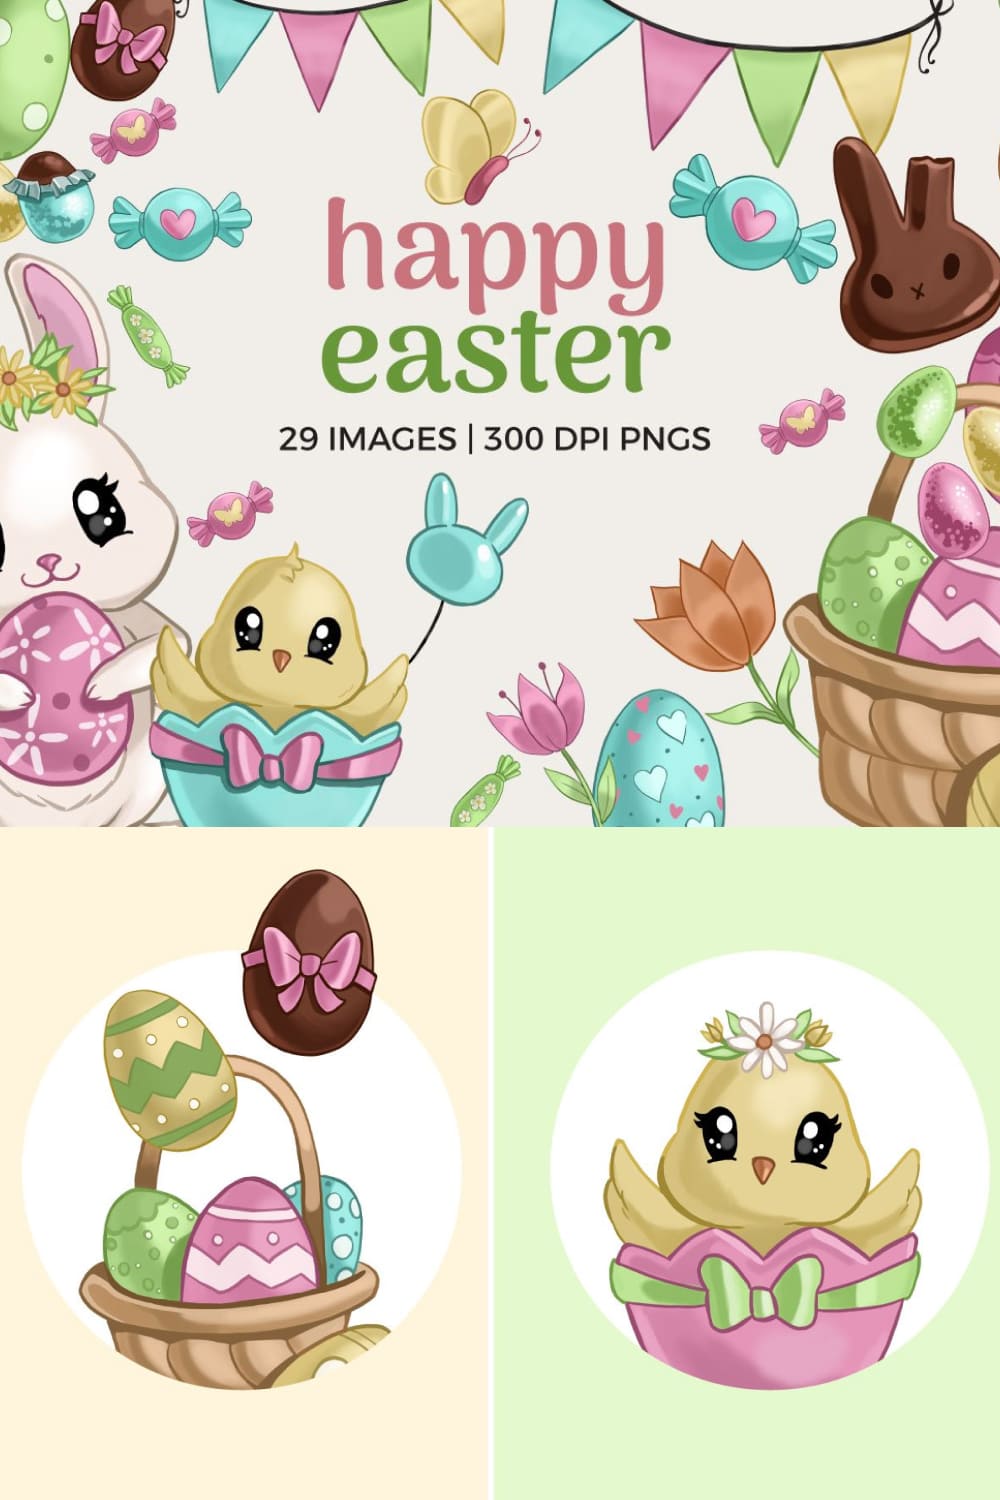 Happy Easter PNG Clipart - Pinterest.